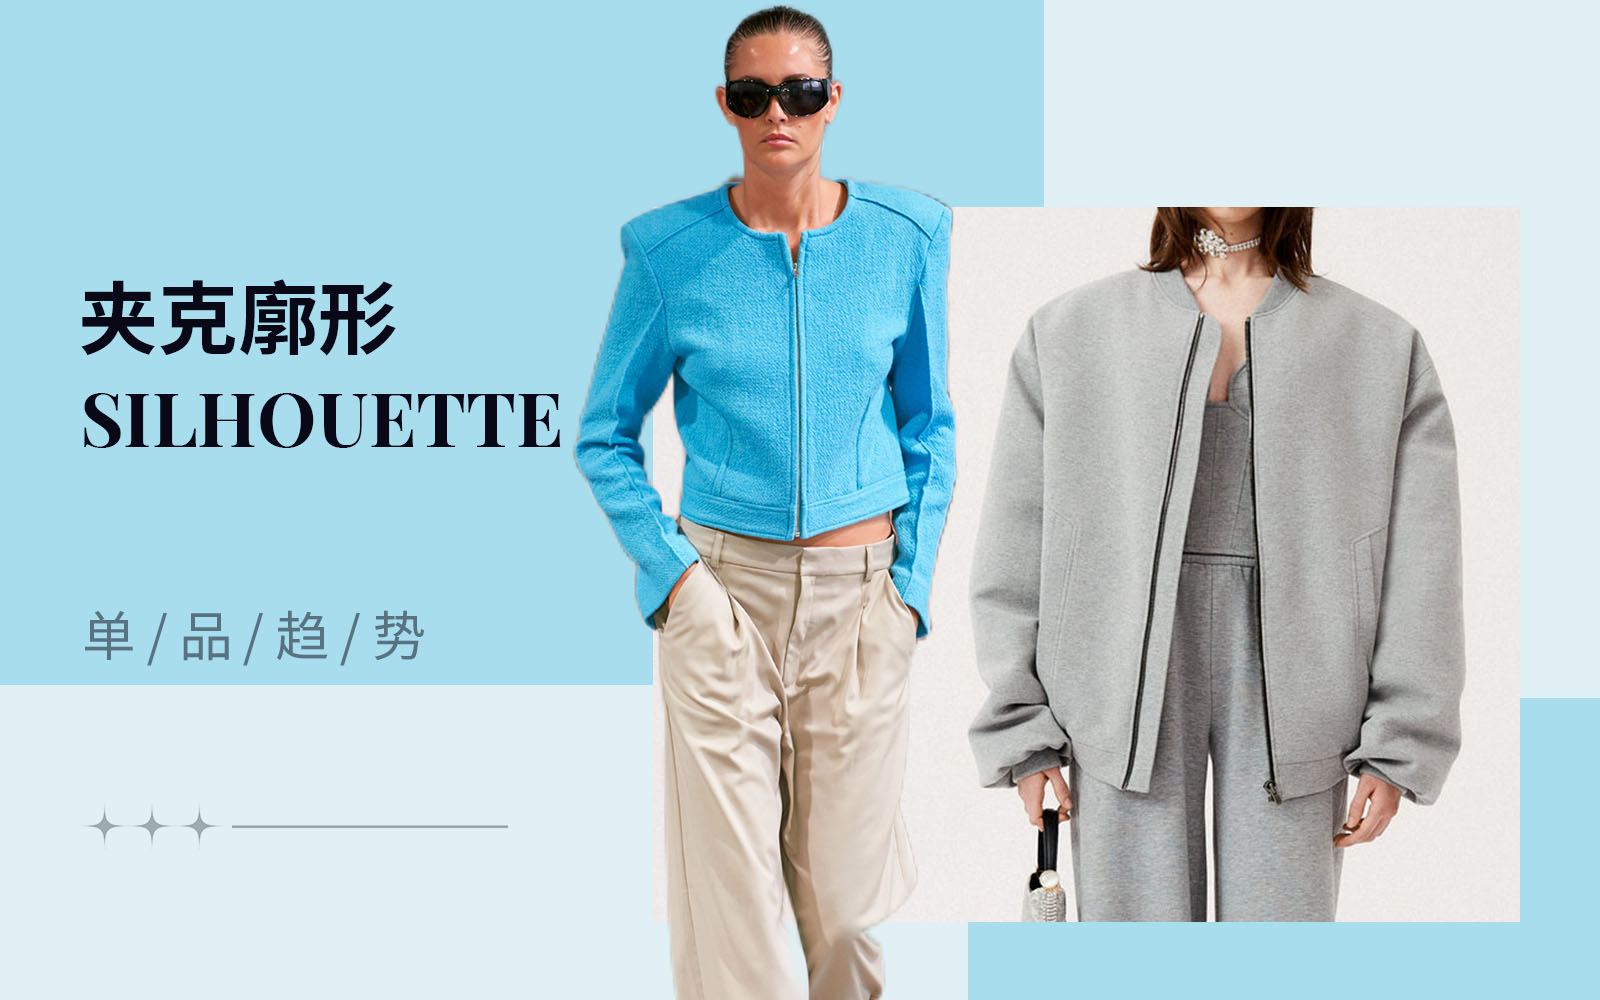 New Poses -- The Silhouette Trend for Women's Jacket